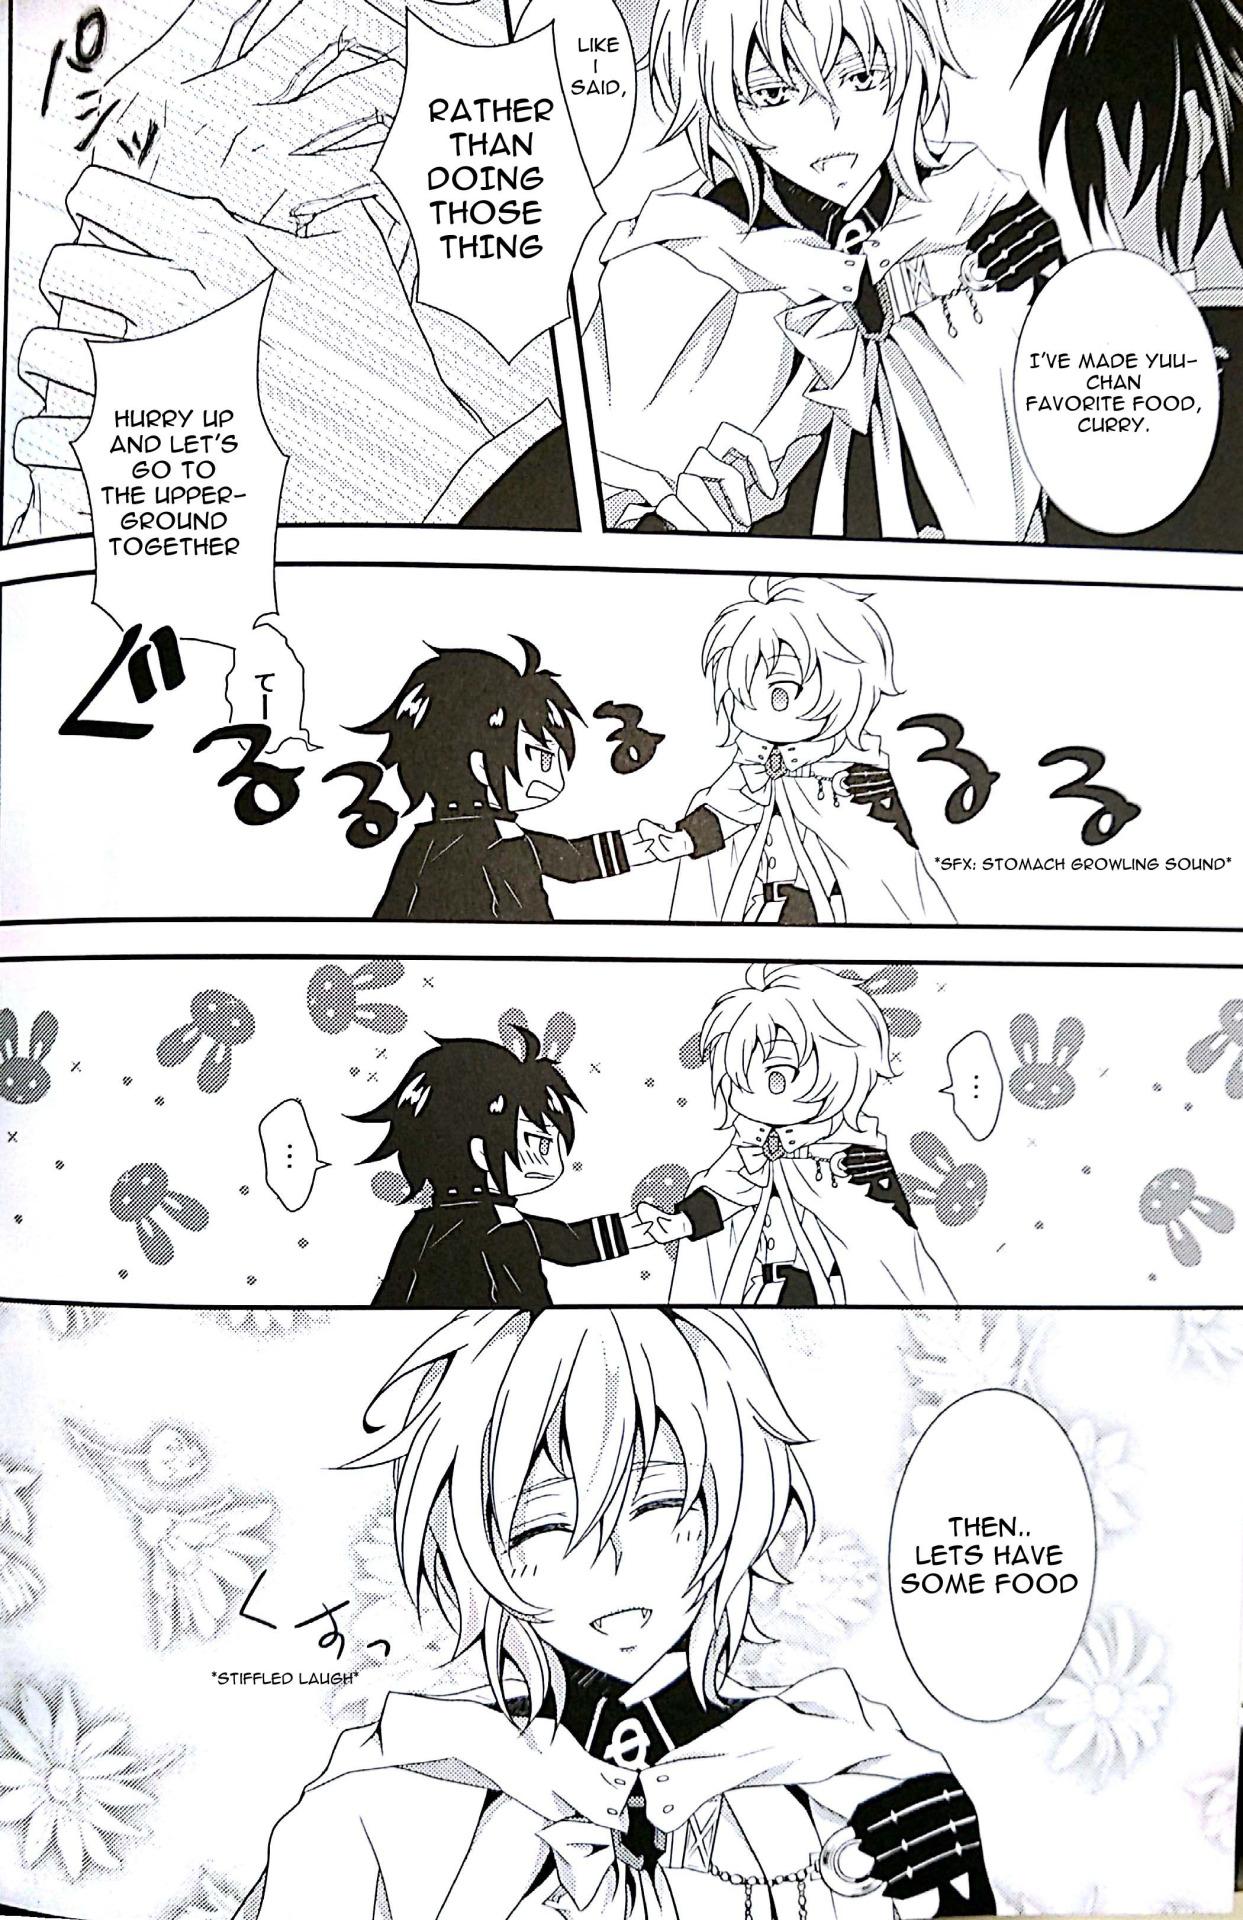 Rebolando Thirst for blood - Seraph of the end Camera - Page 4